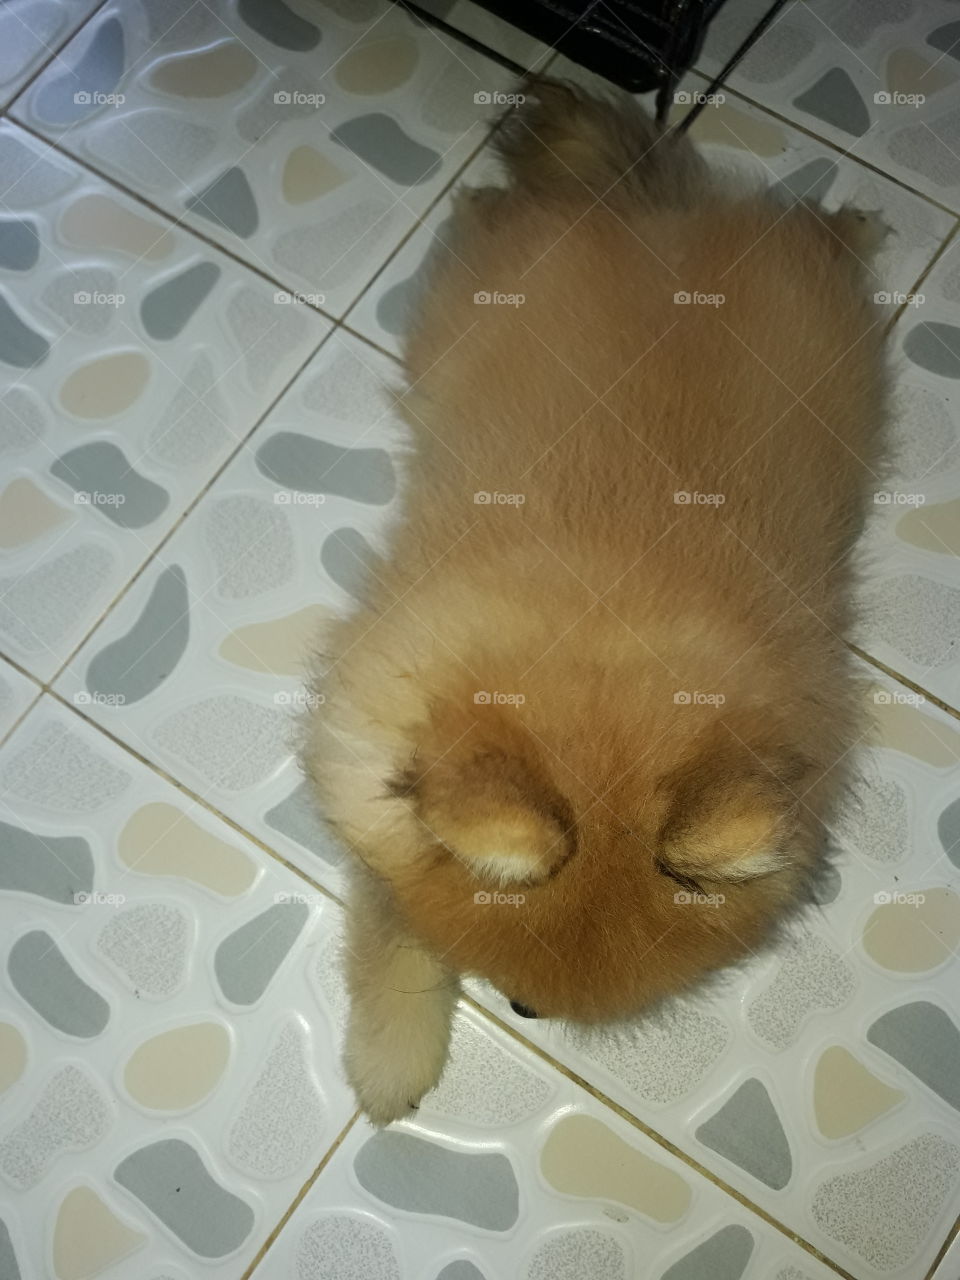 small orange-brown puppy  "pomeranian" is sitting on the floor.